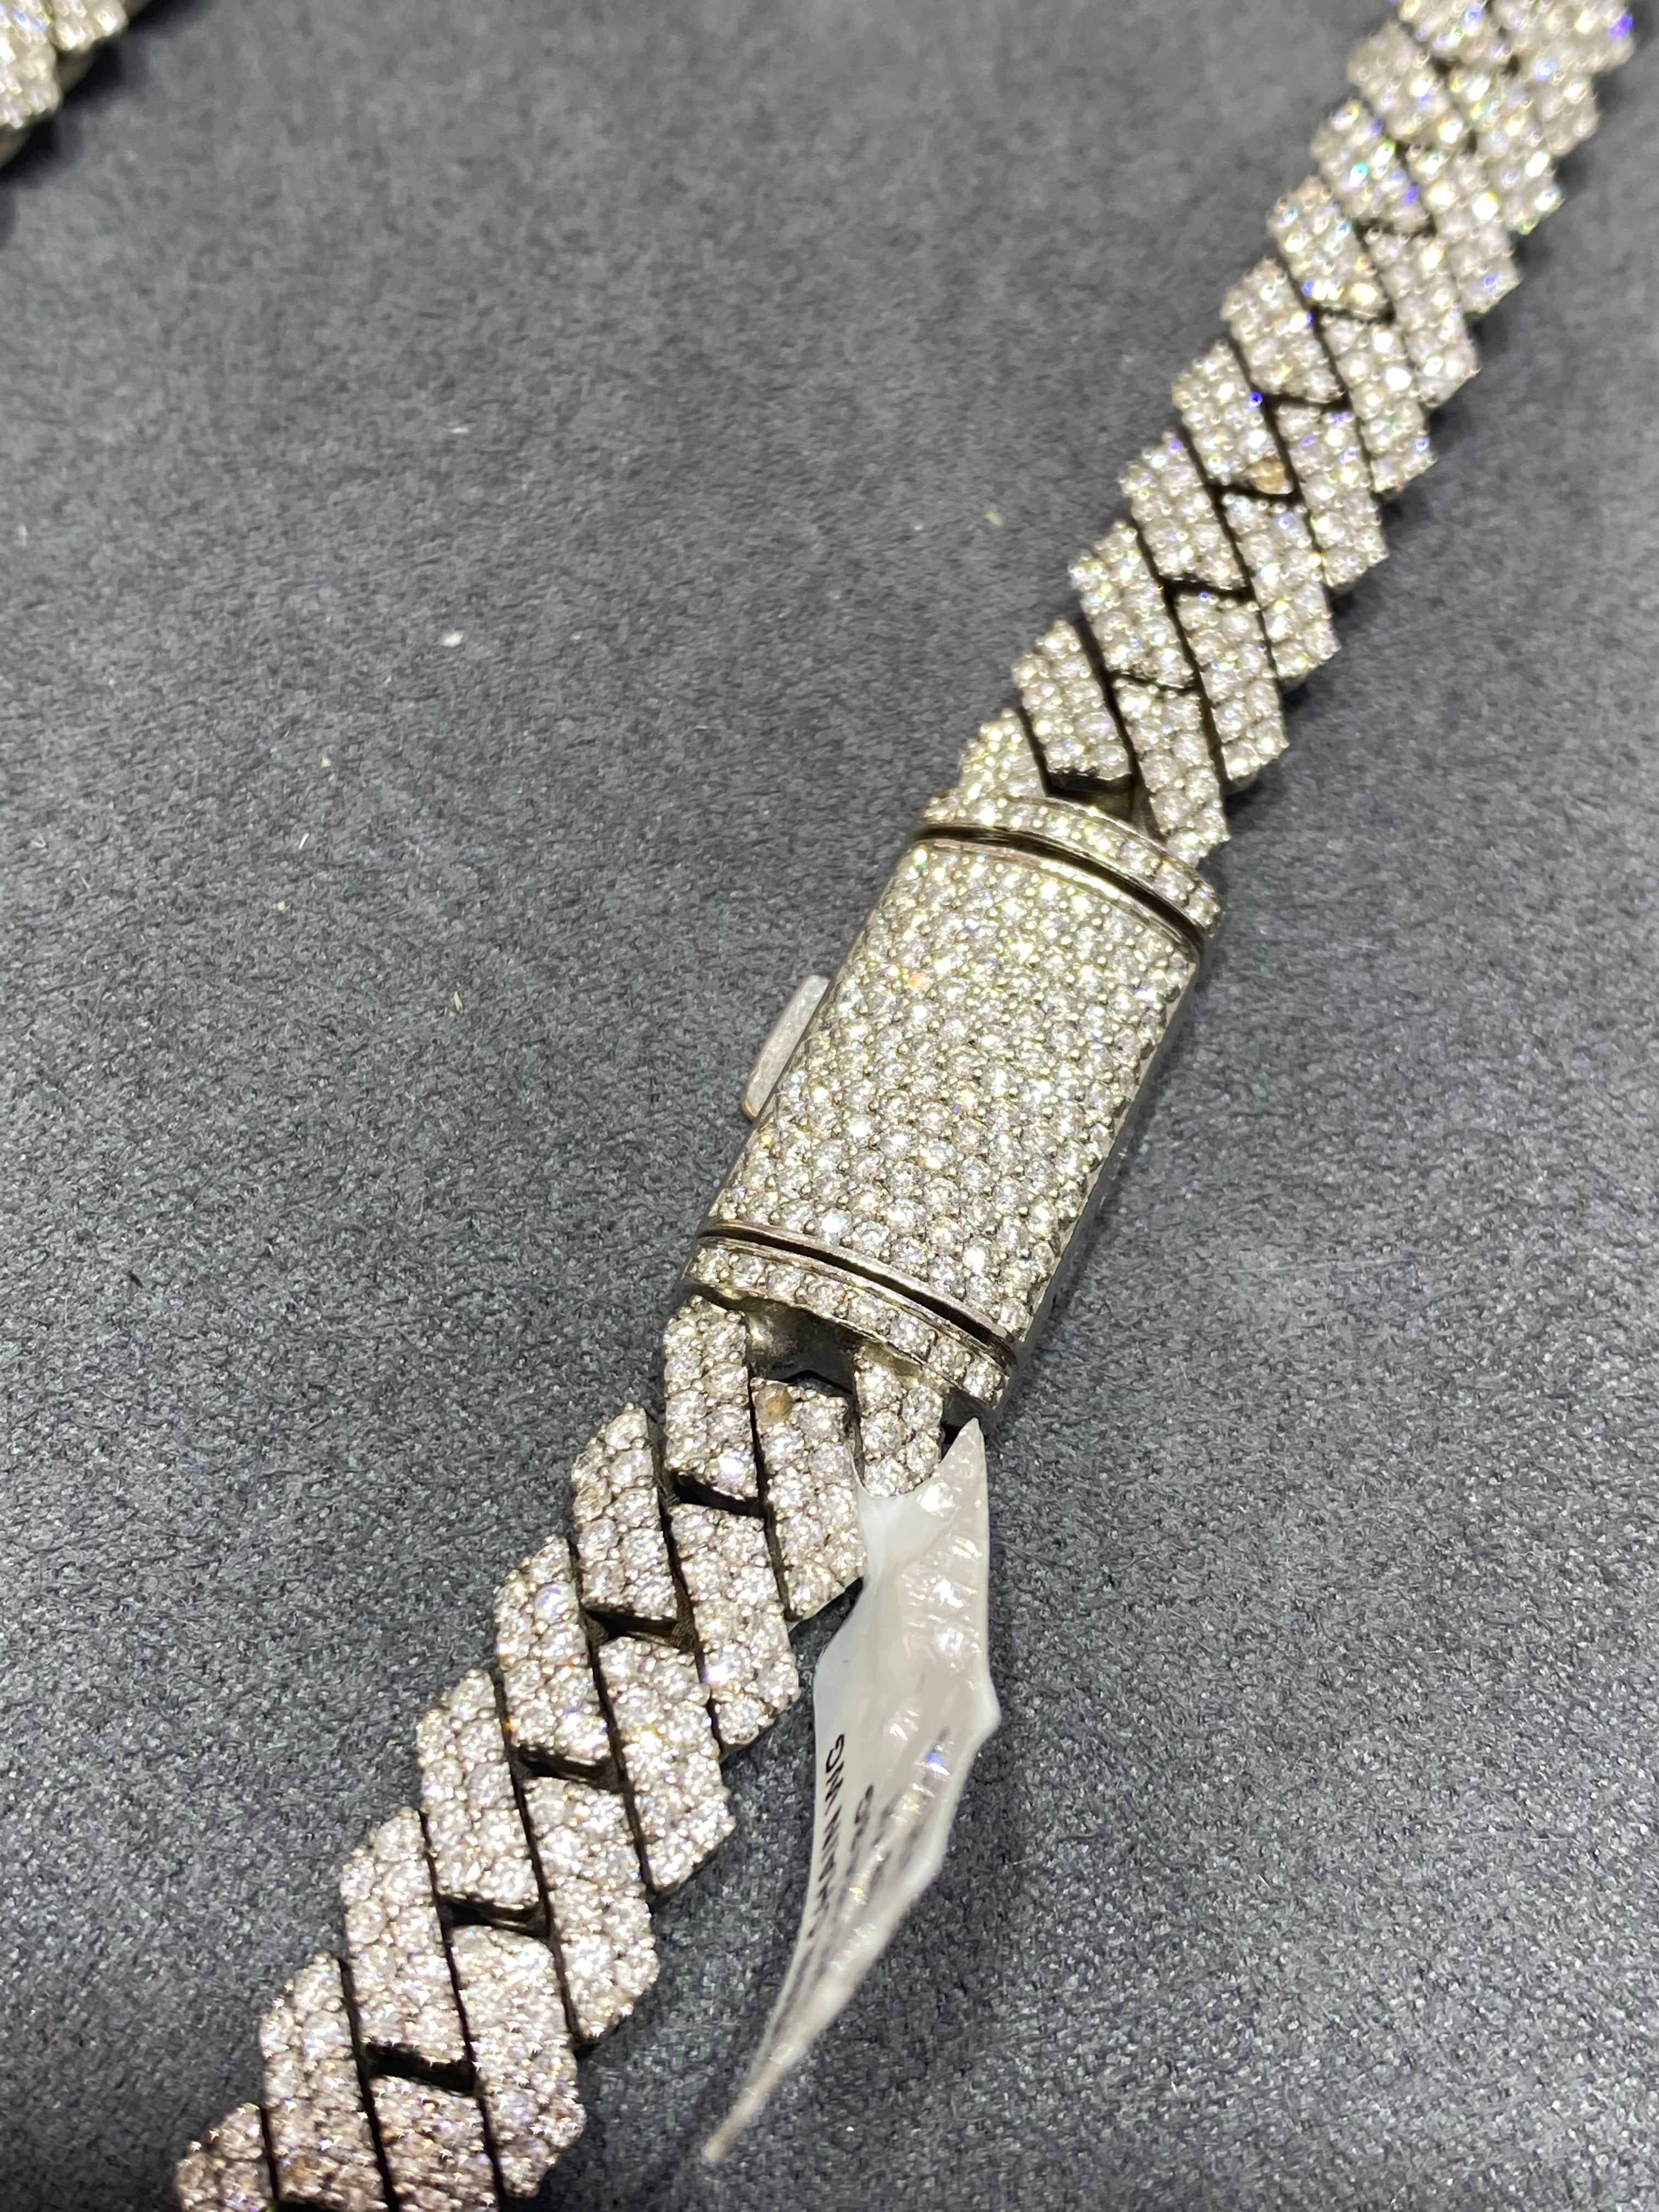 New ICED 14k WHITE GOLD MIAMI CUBAN NECKLACE Vs1 24.cts.t.w. NATURAL DIAMONDS